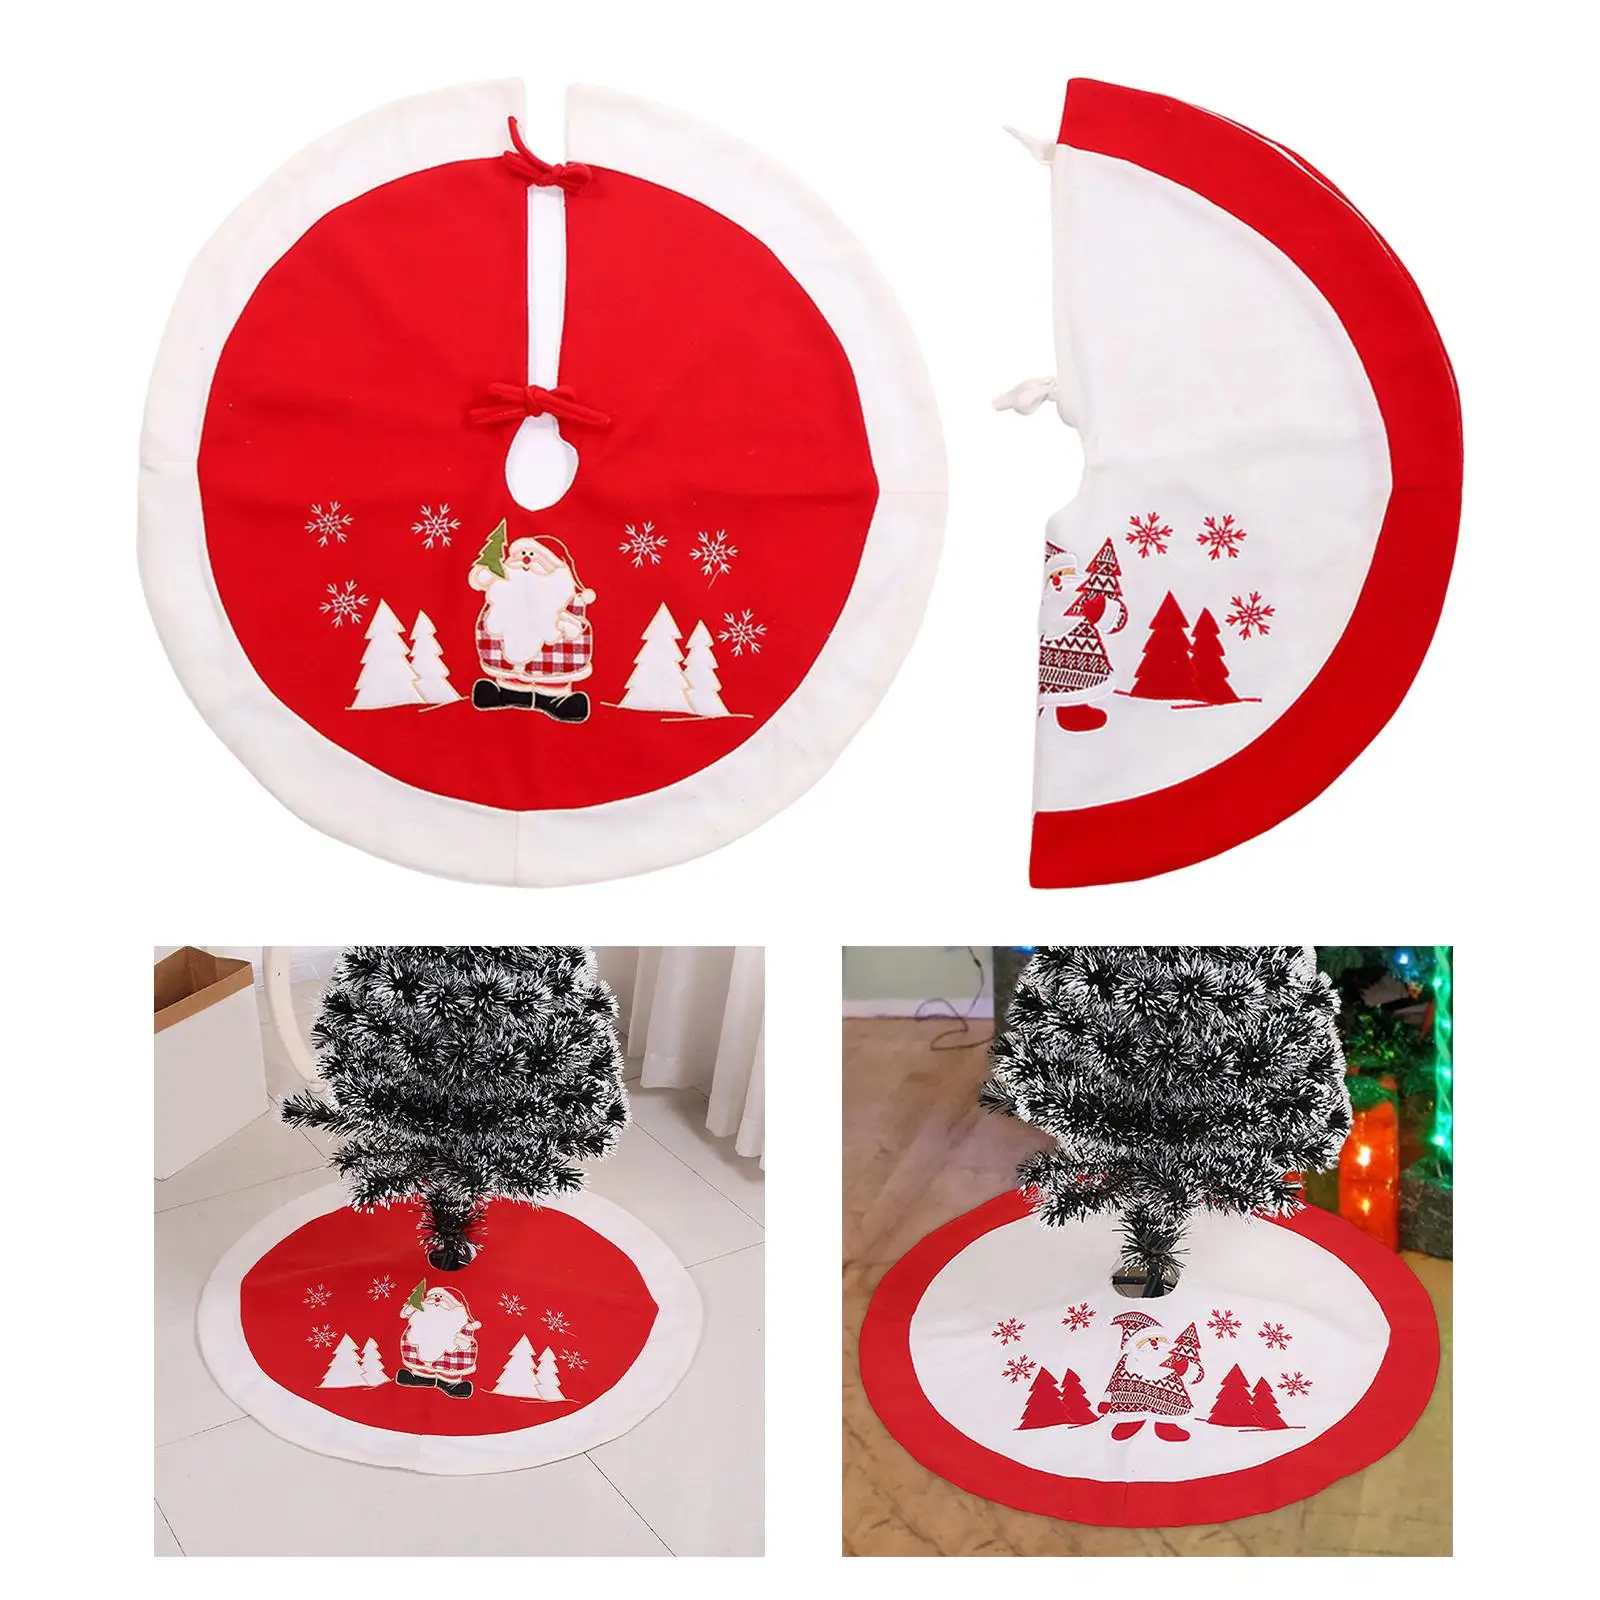 35inch Christmas Tree Skirt with Santa Claus Pattern Vintage Ornaments Xmas Tree Mat for Outdoor office home